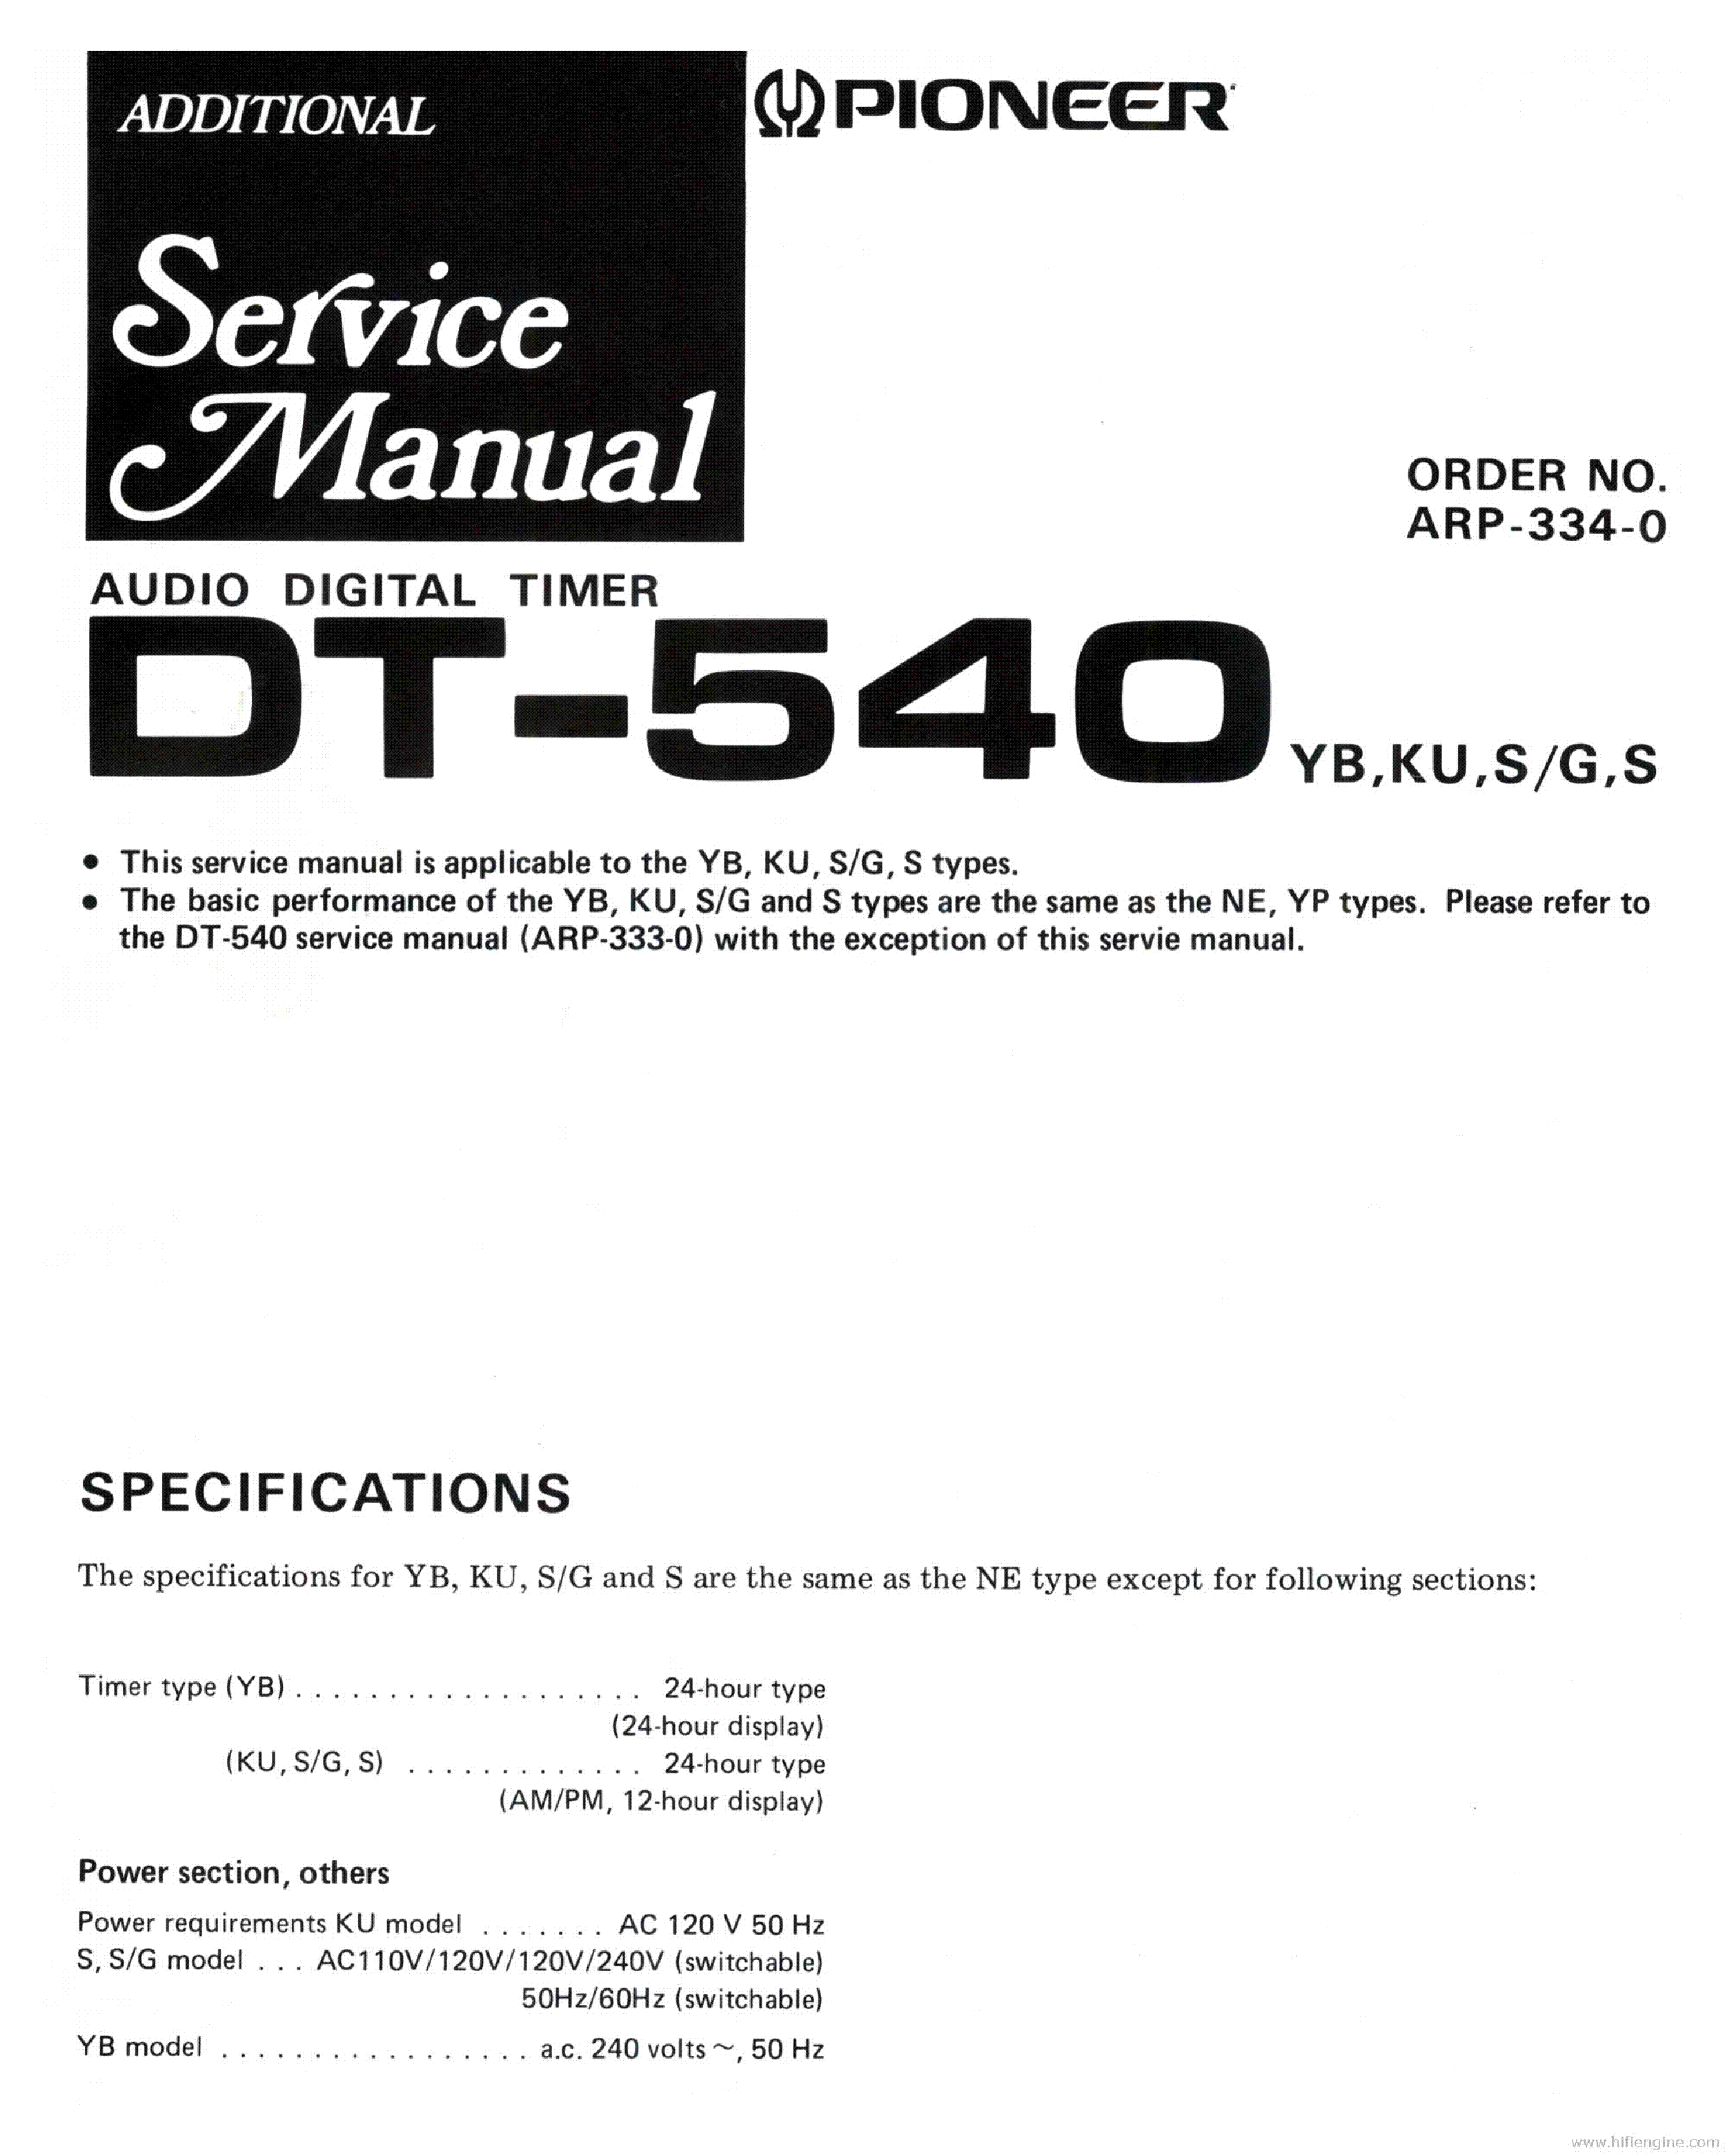 PIONEER DT-540 ARP3340 ADDITIONAL MANUAL service manual (1st page)